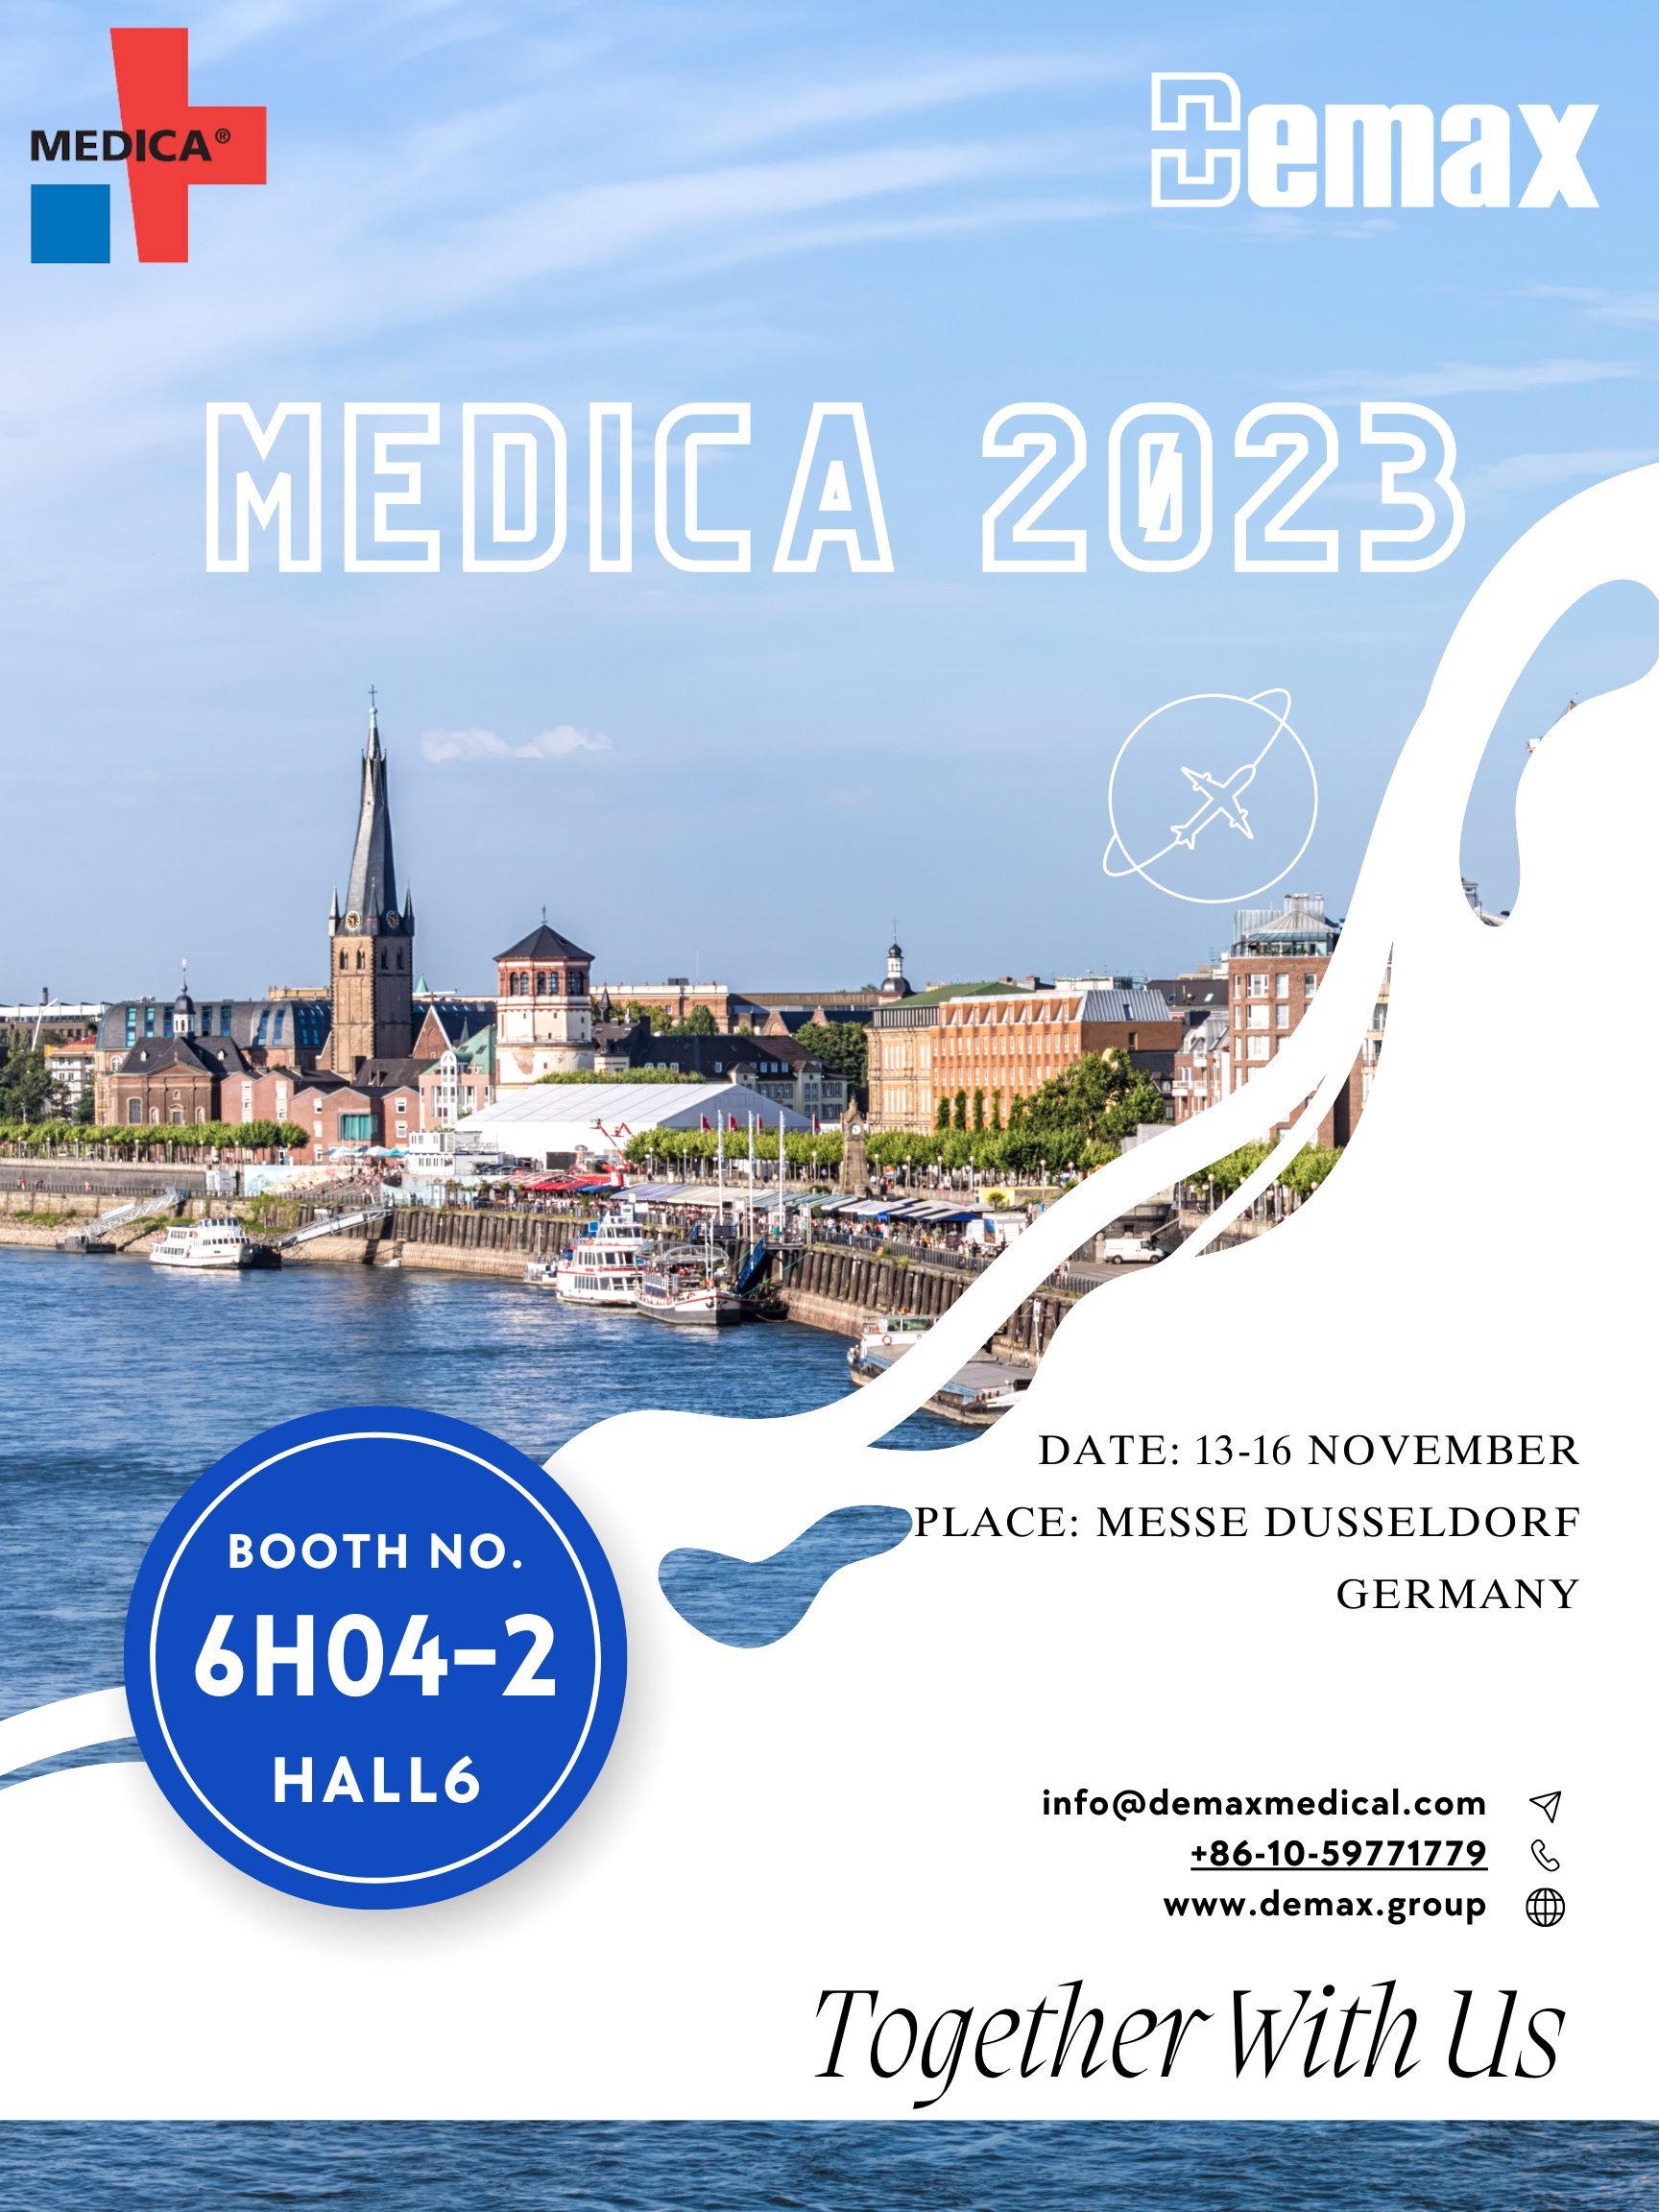 MEDICA2023 concluded successfully, let us review Demax’s trip to Dusseldorf.